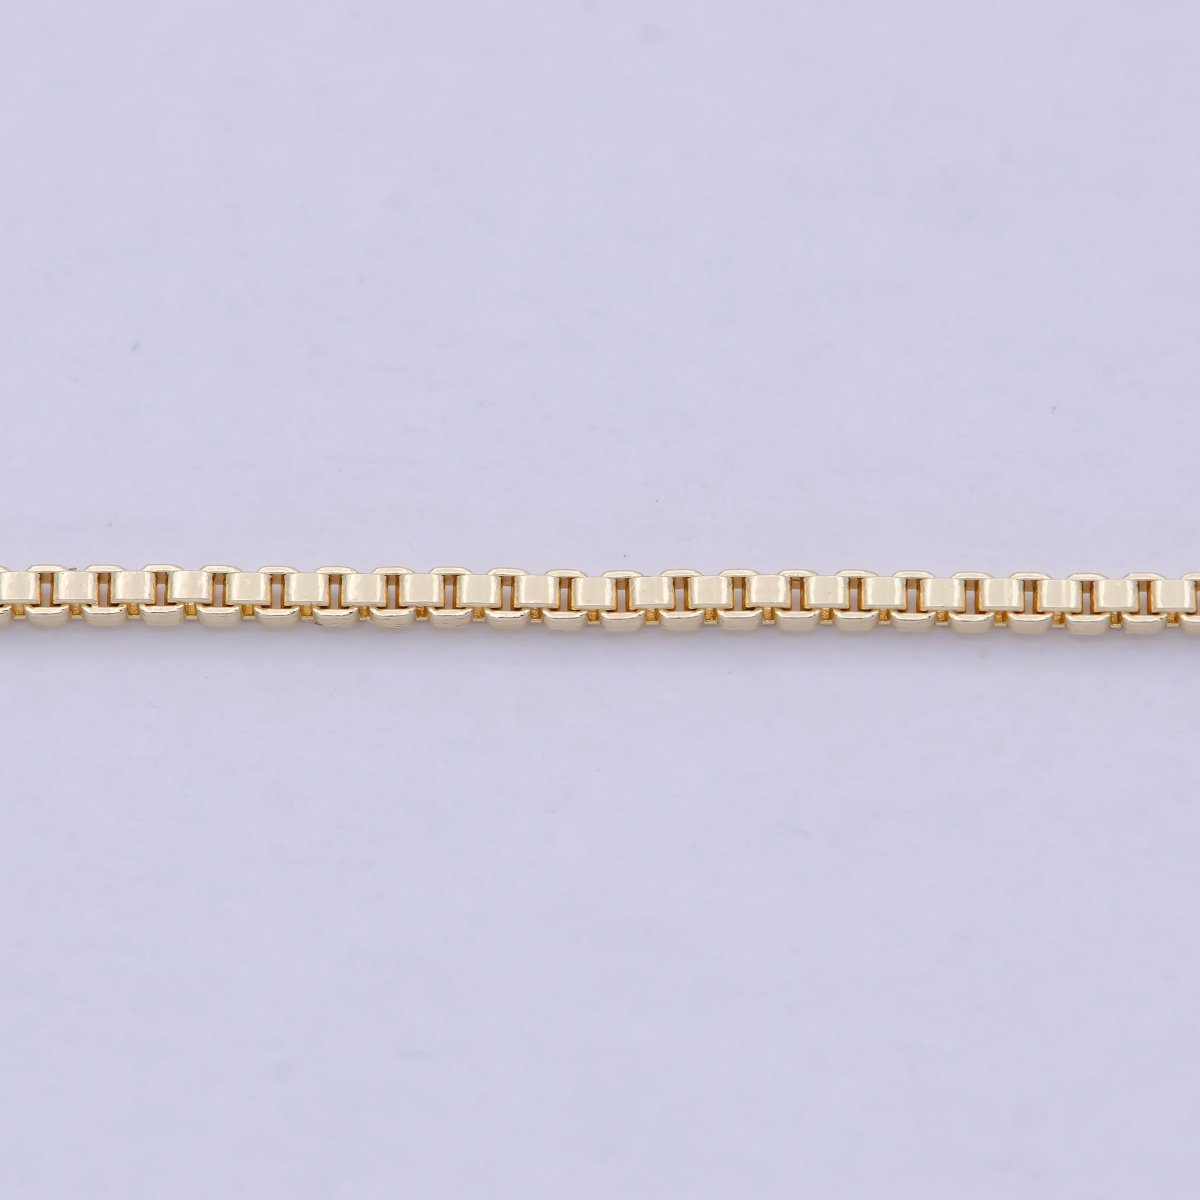 OS Dainty Chain box necklace 19.2 inch box, Dainty gold Box chain 1.0 mm minimalist necklace jewelry supply | WA-832 Clearance Pricing - DLUXCA